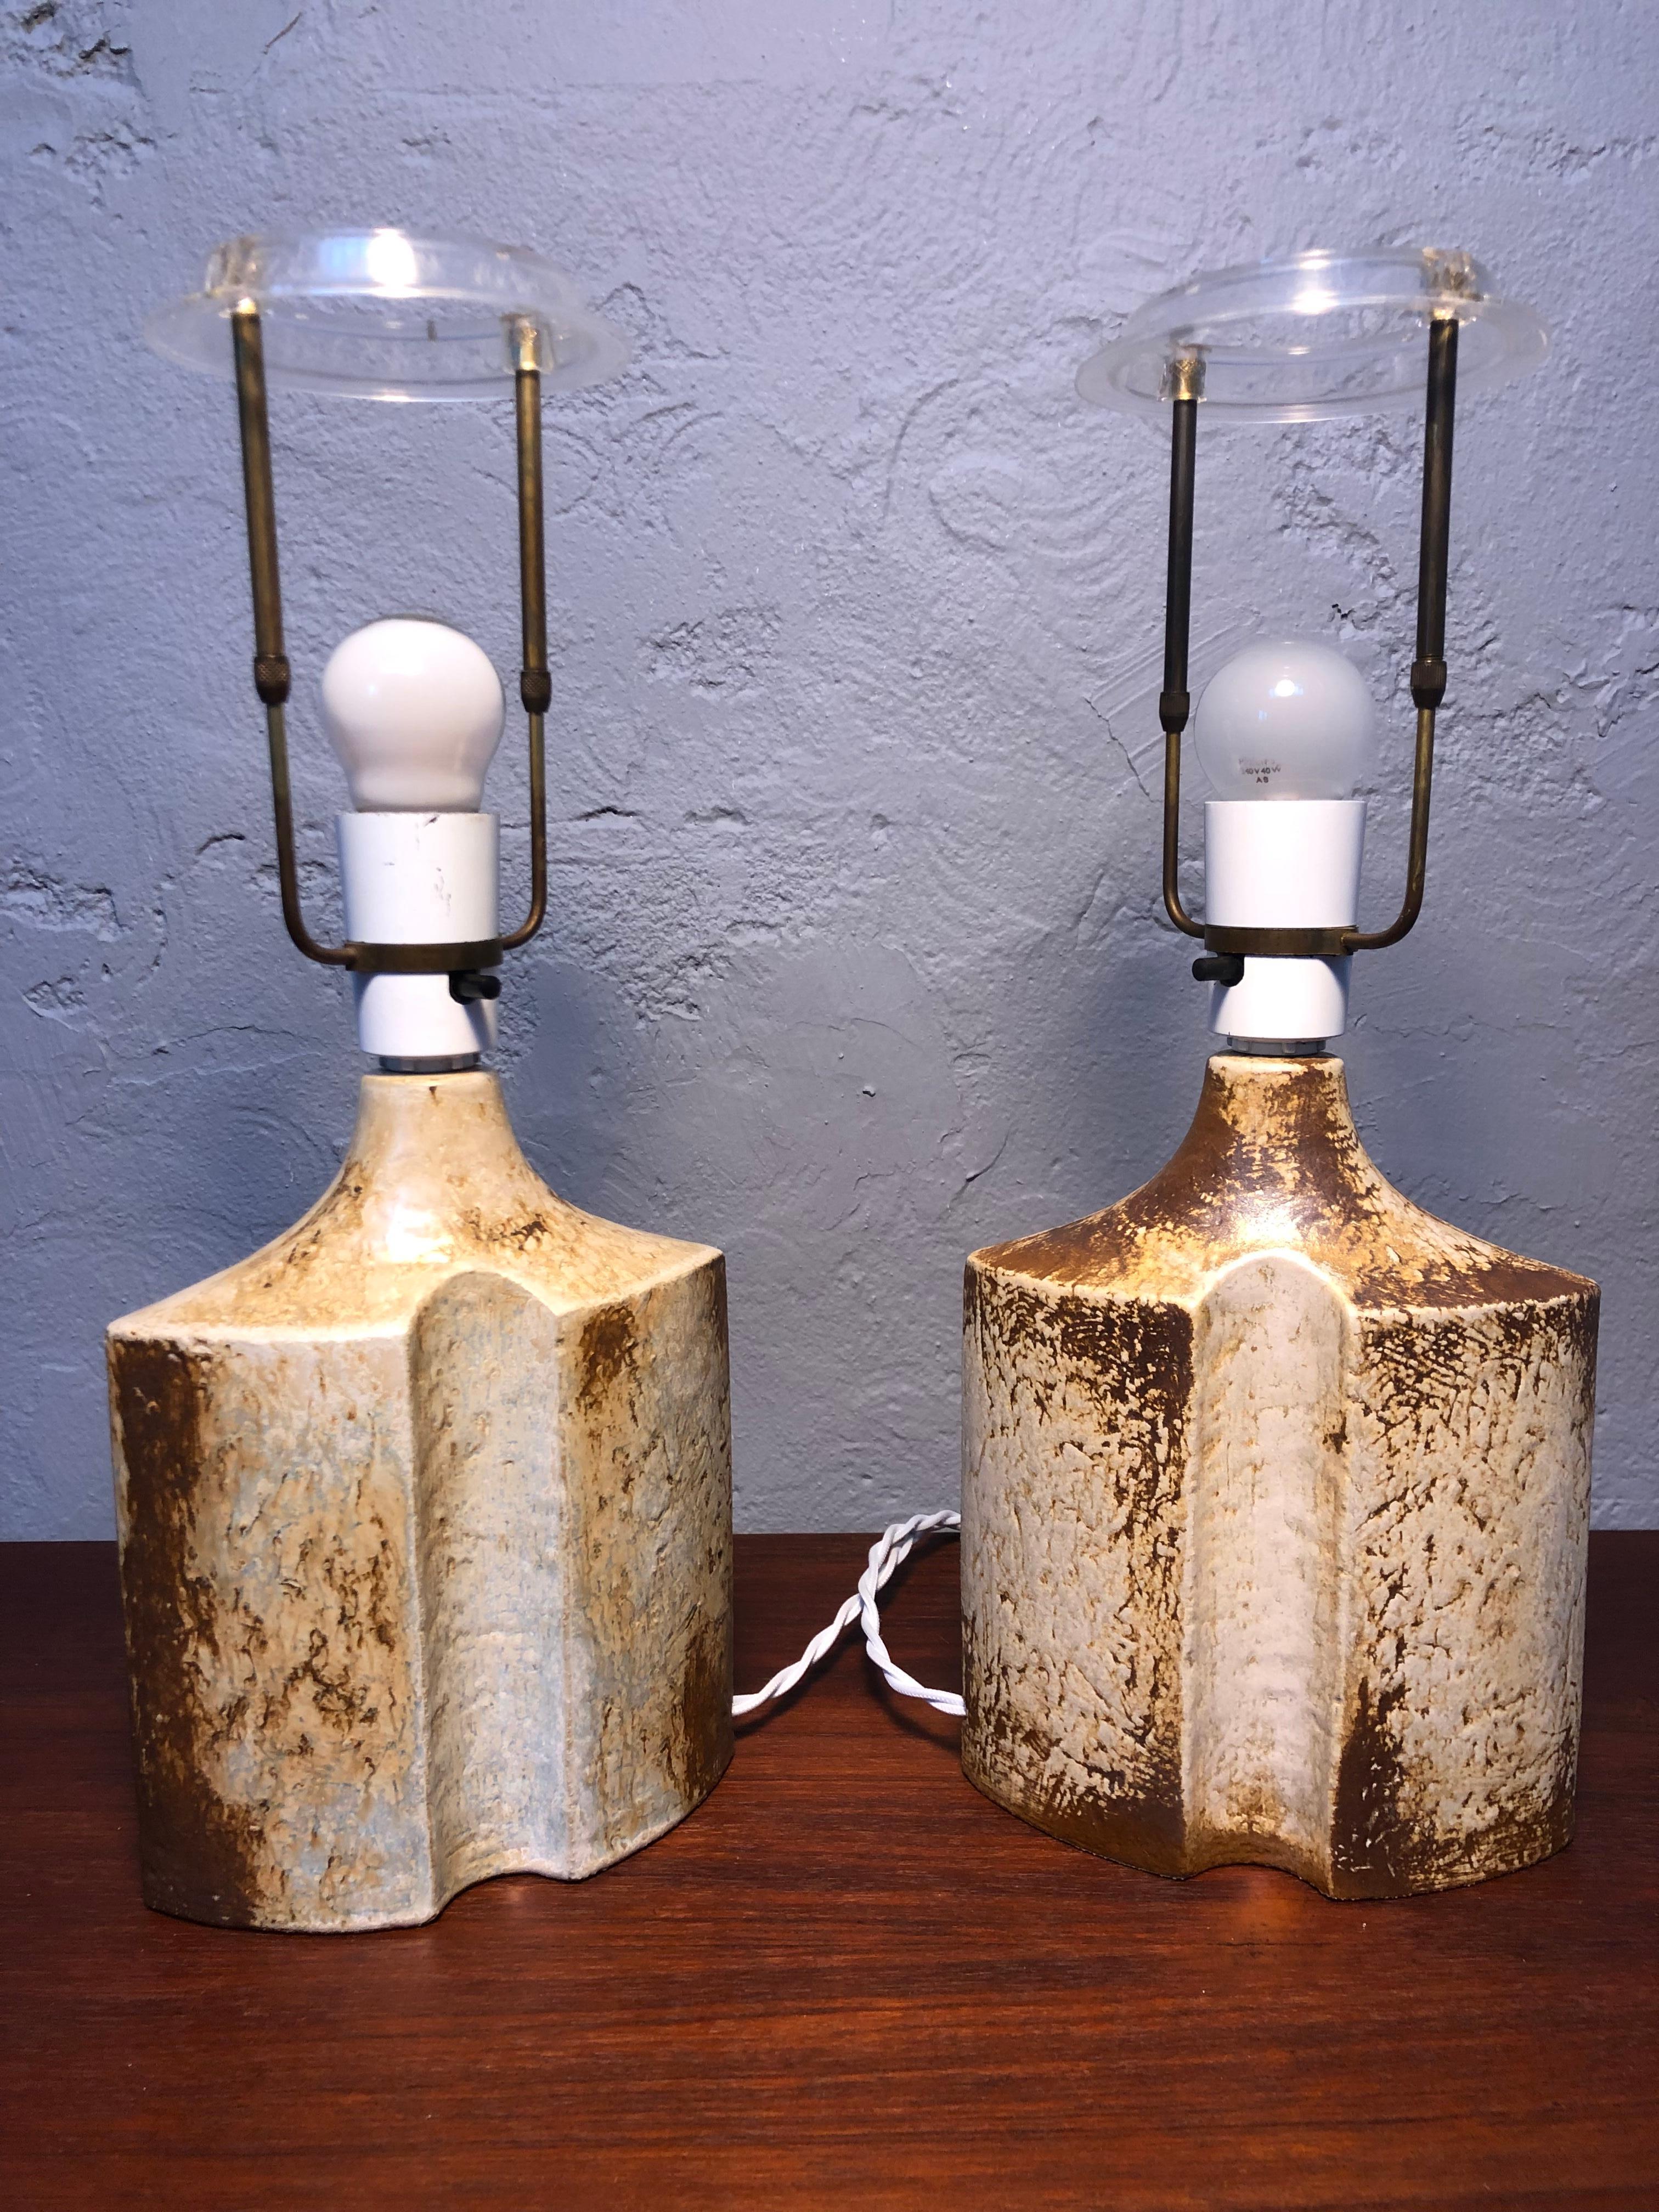 A vintage pair of brutalist pottery table lamps by Norwegian designer Haico Nitzsche for Søholm of Denmark. 
In 1973 Haico Nitzsche left Gustavberg of Sweden and moved to Rønne on the island of Bornholm Denmark where the Søholm factory was located